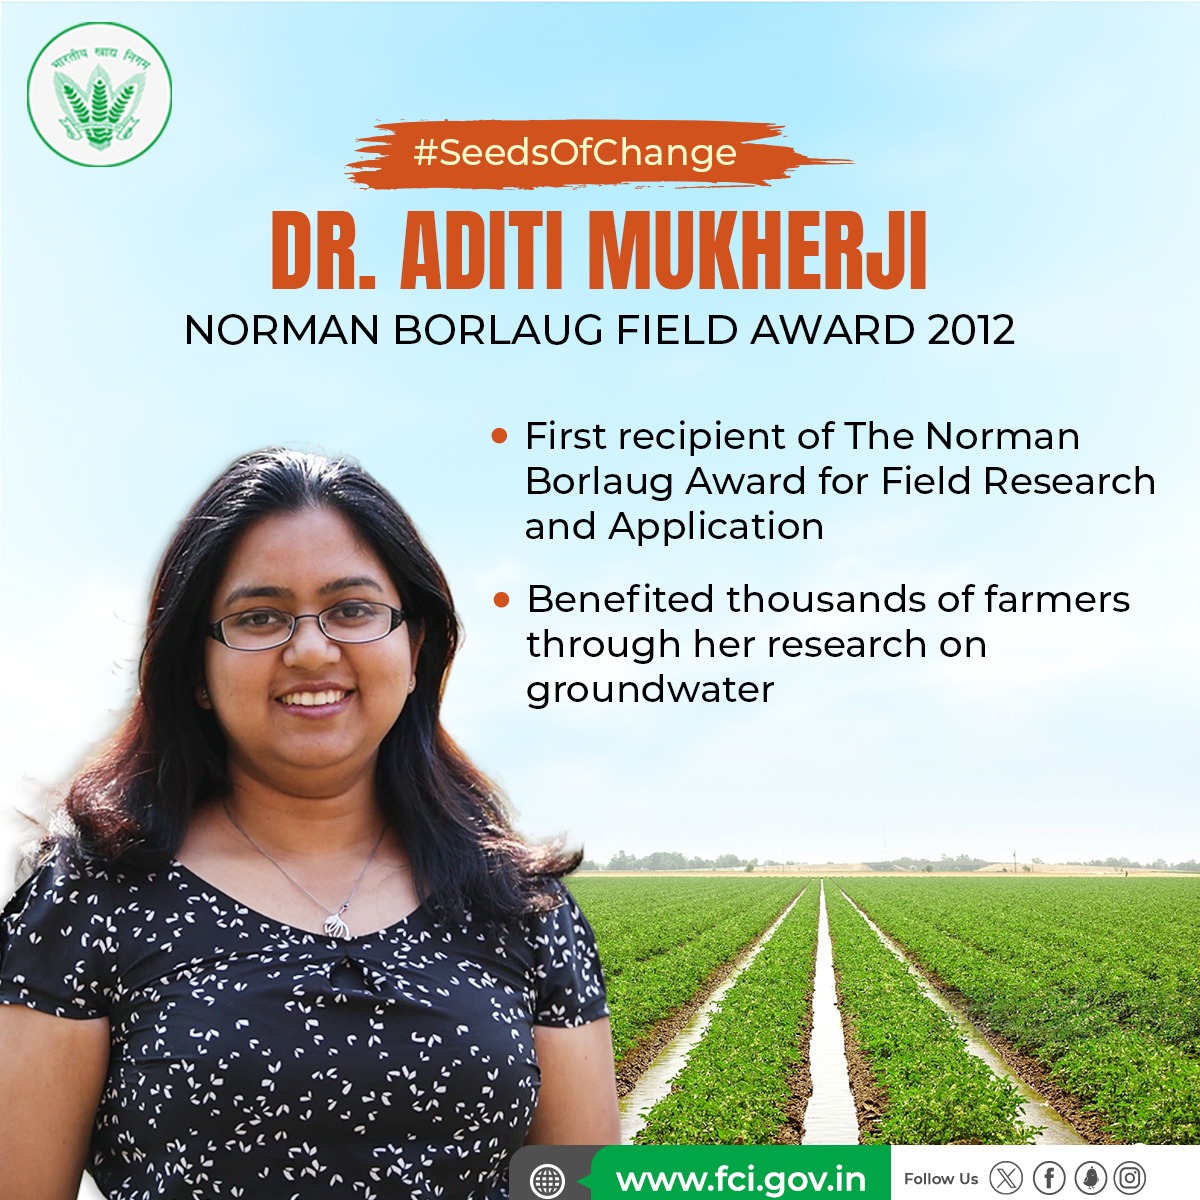 Dr. Aditi Mukherji transformed the lives of thousands of small holder farmers in West Bengal, India. Her extensive field work survey led to policy change regarding usage of groundwater for irrigation. #SeedsOfChange #WorldFoodDay2023 #WorldFoodPrize